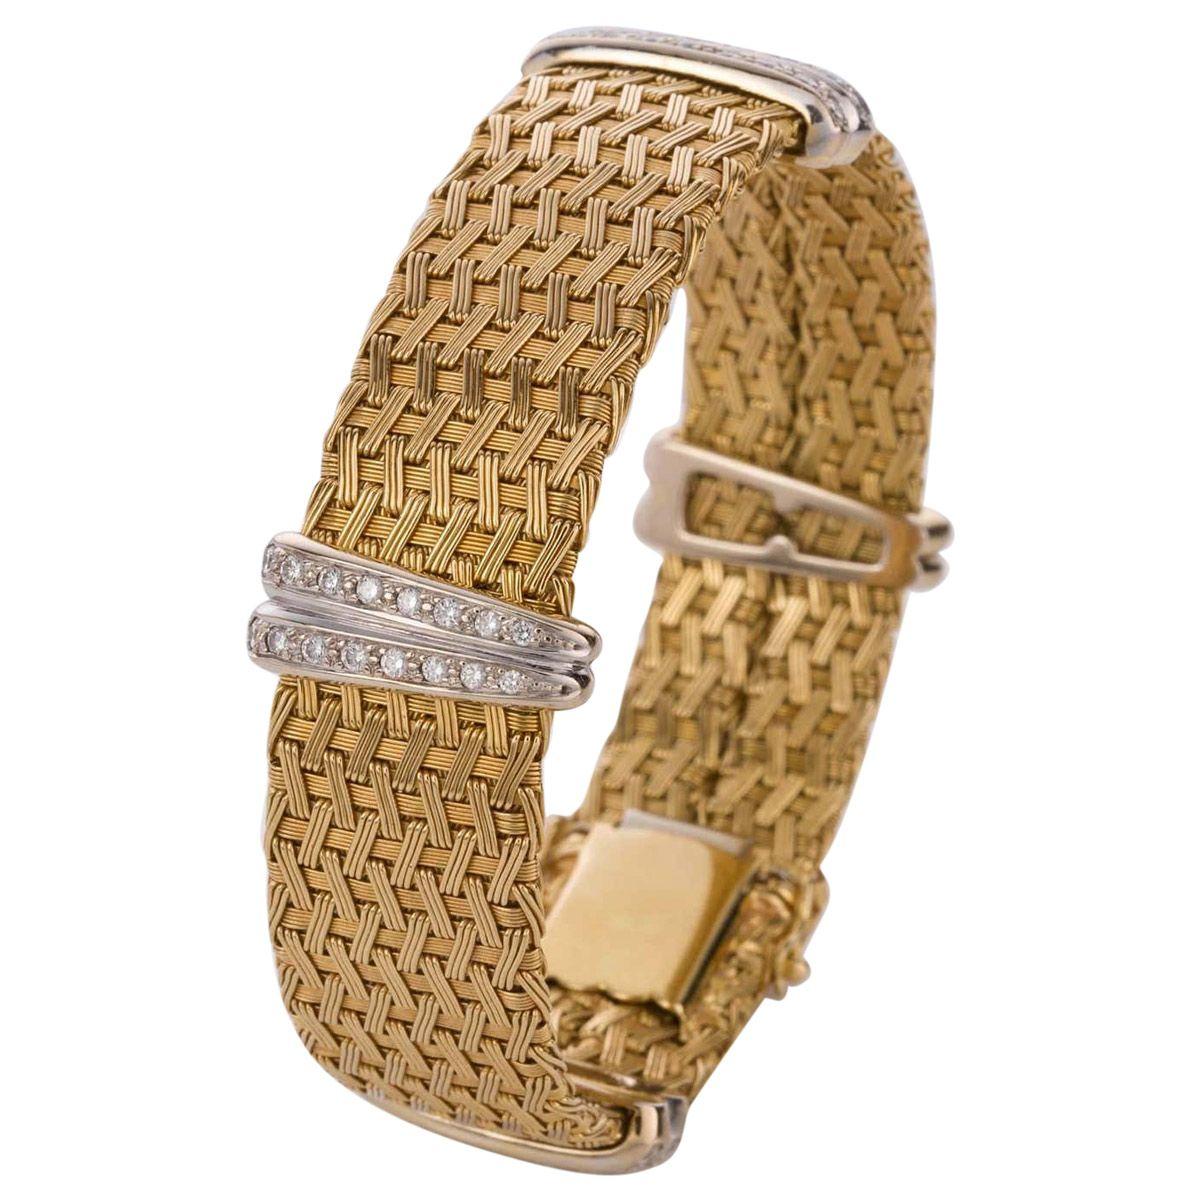 This bracelet is truly sensational -  a finely crafted German woven mesh bracelet in 18ct yellow gold, featuring four white gold double bars showcasing 64 grain set white modern brilliant diamonds weighing approximately  0.80cts. The diamonds are